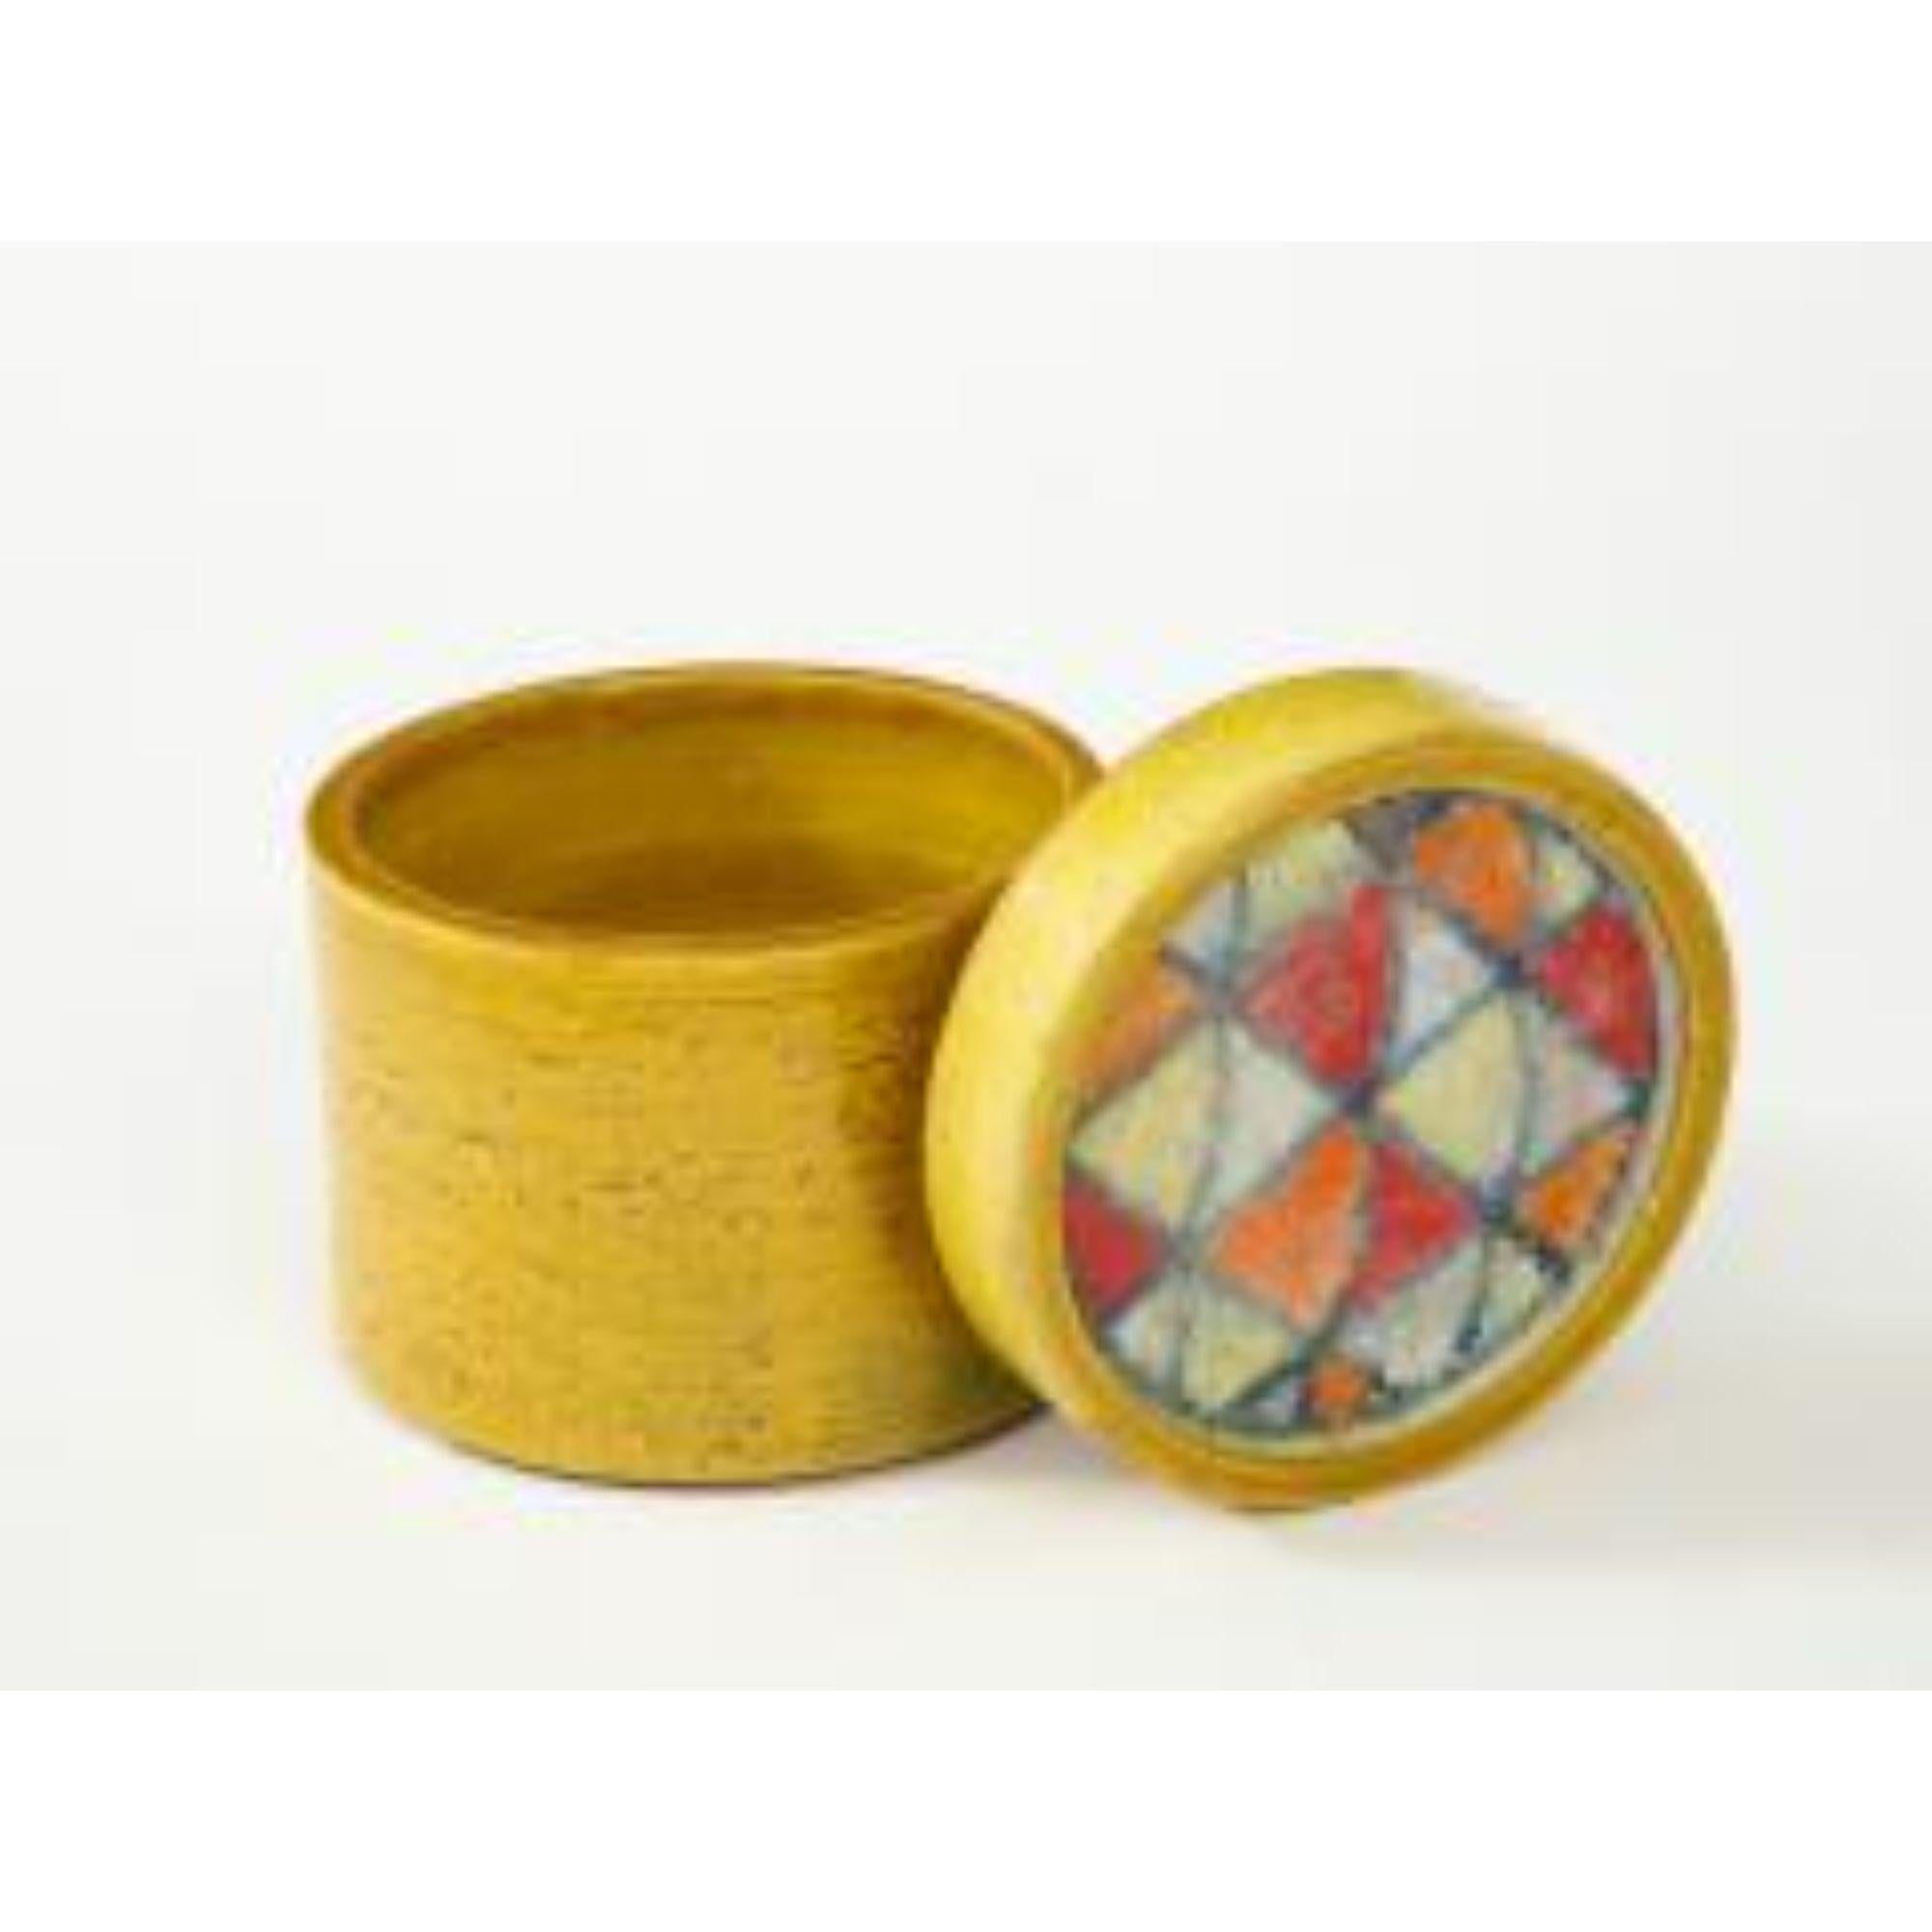 Bitossi Lidded Box in Glazed Ceramic with Fused Glass Mosaic, circa 1960s For Sale 1